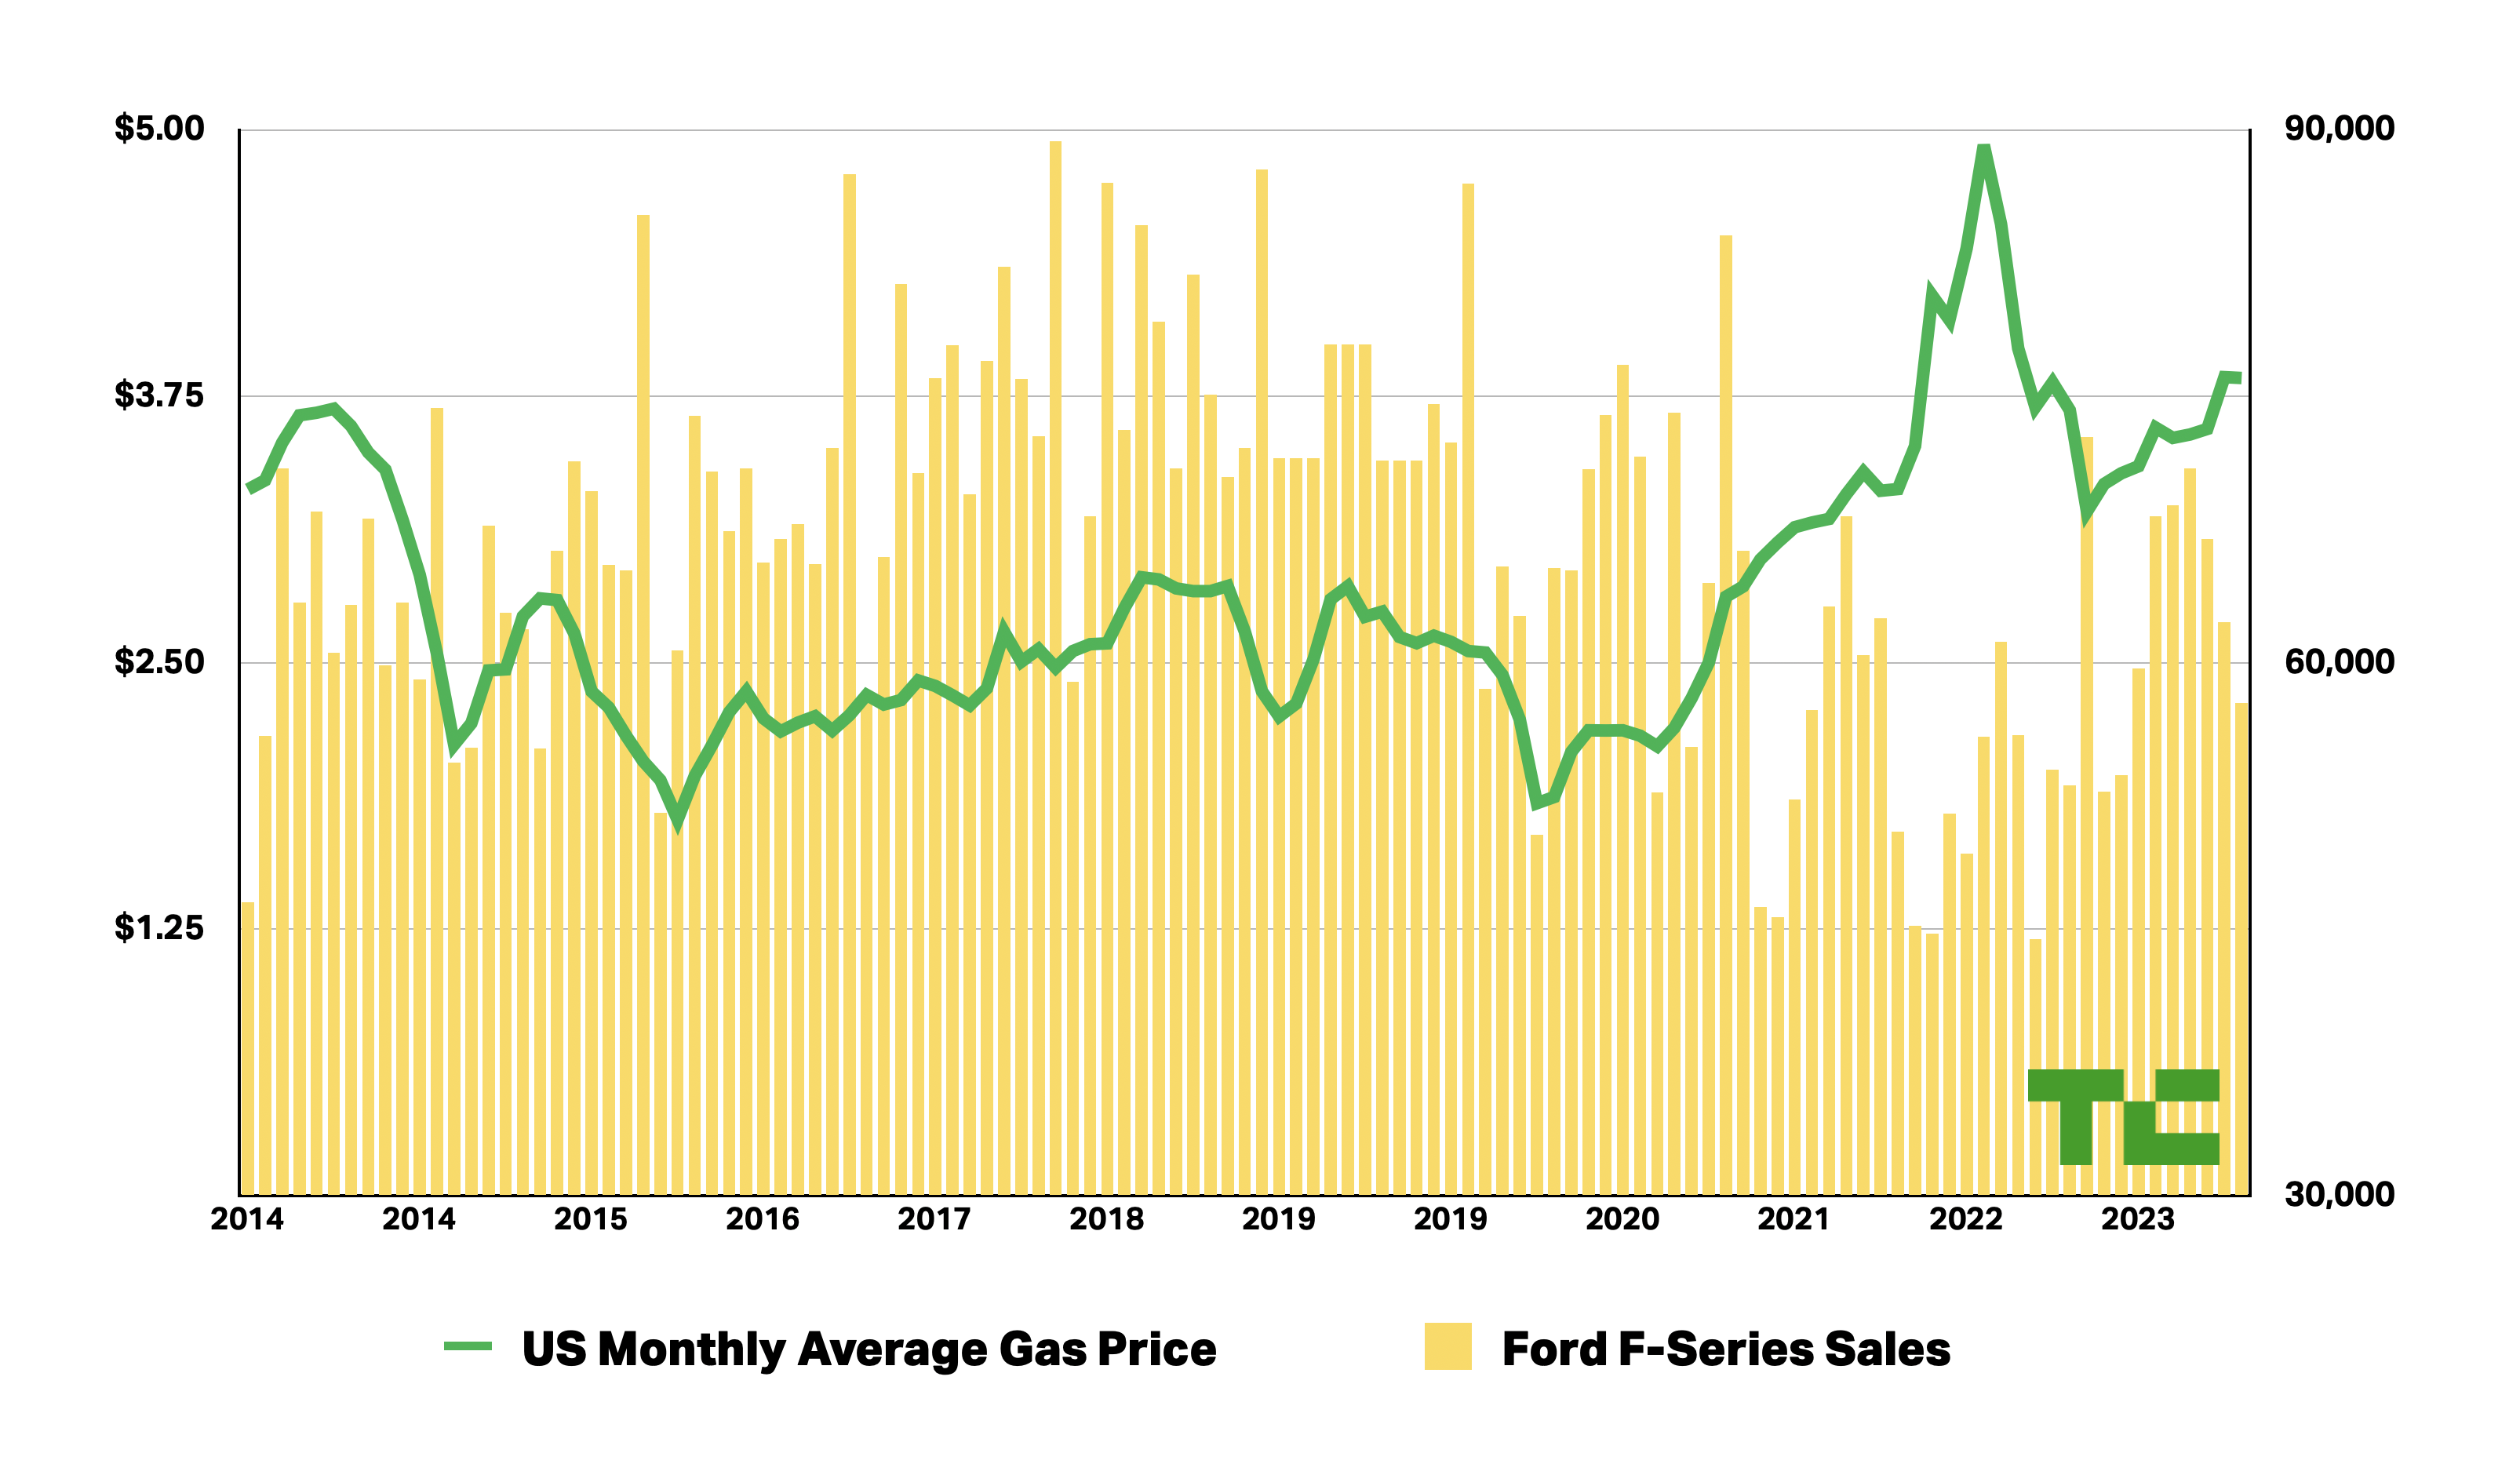 Ford F-Series sales plotted alongside U.S. gas prices 2014-2023.